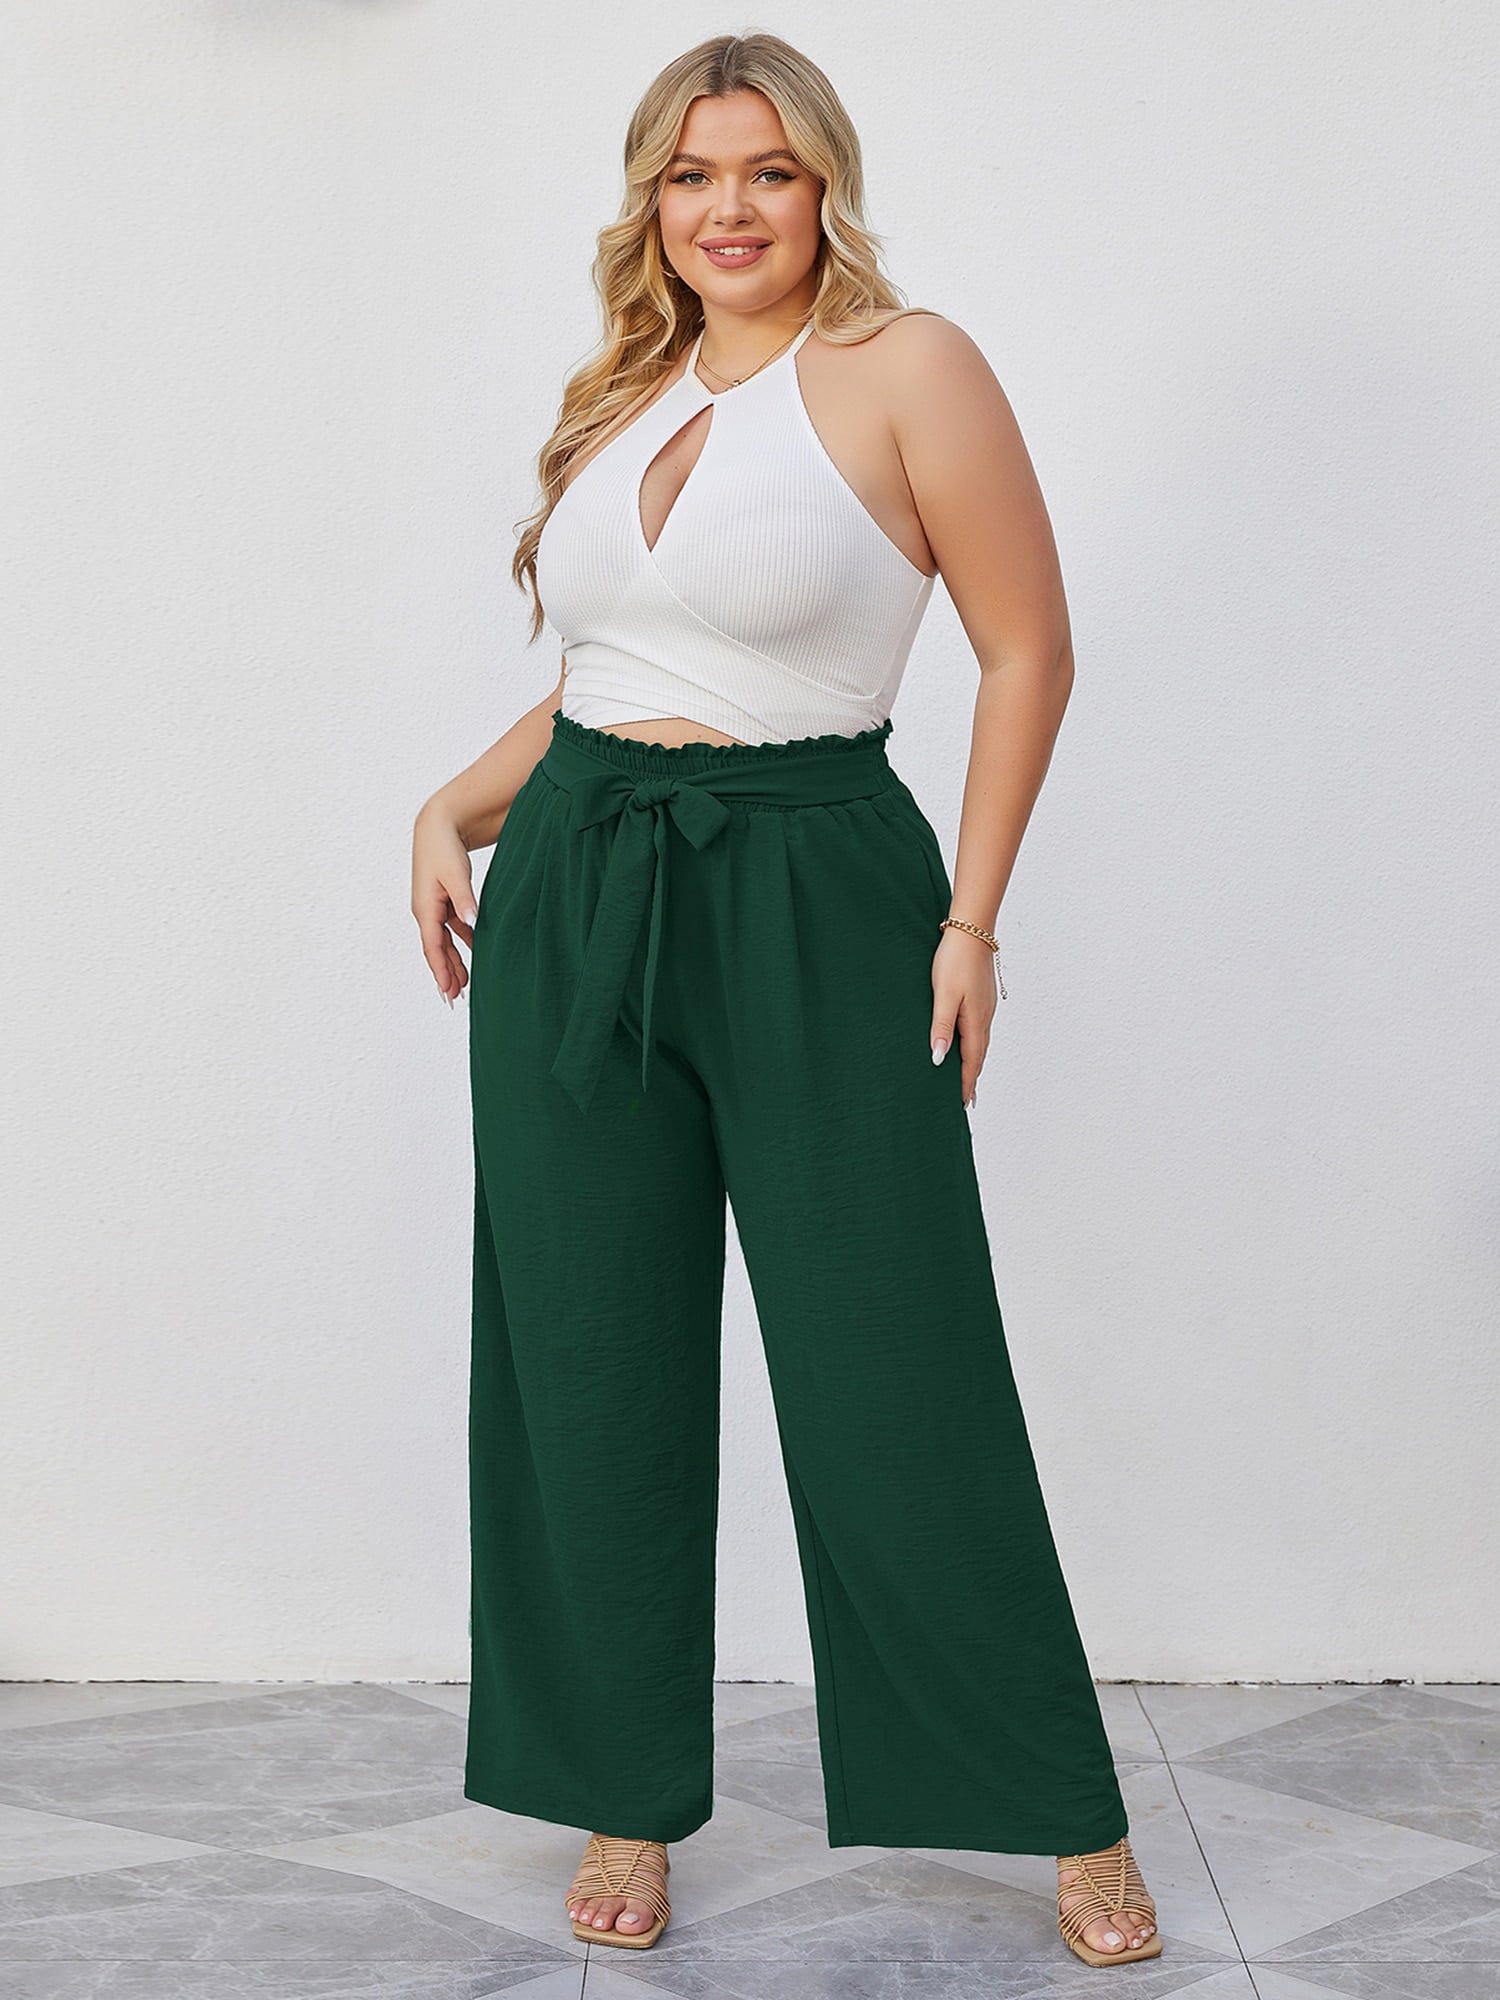 High Waist Wide Leg Palazzo Pants with Pockets with Loose Belt and sup –